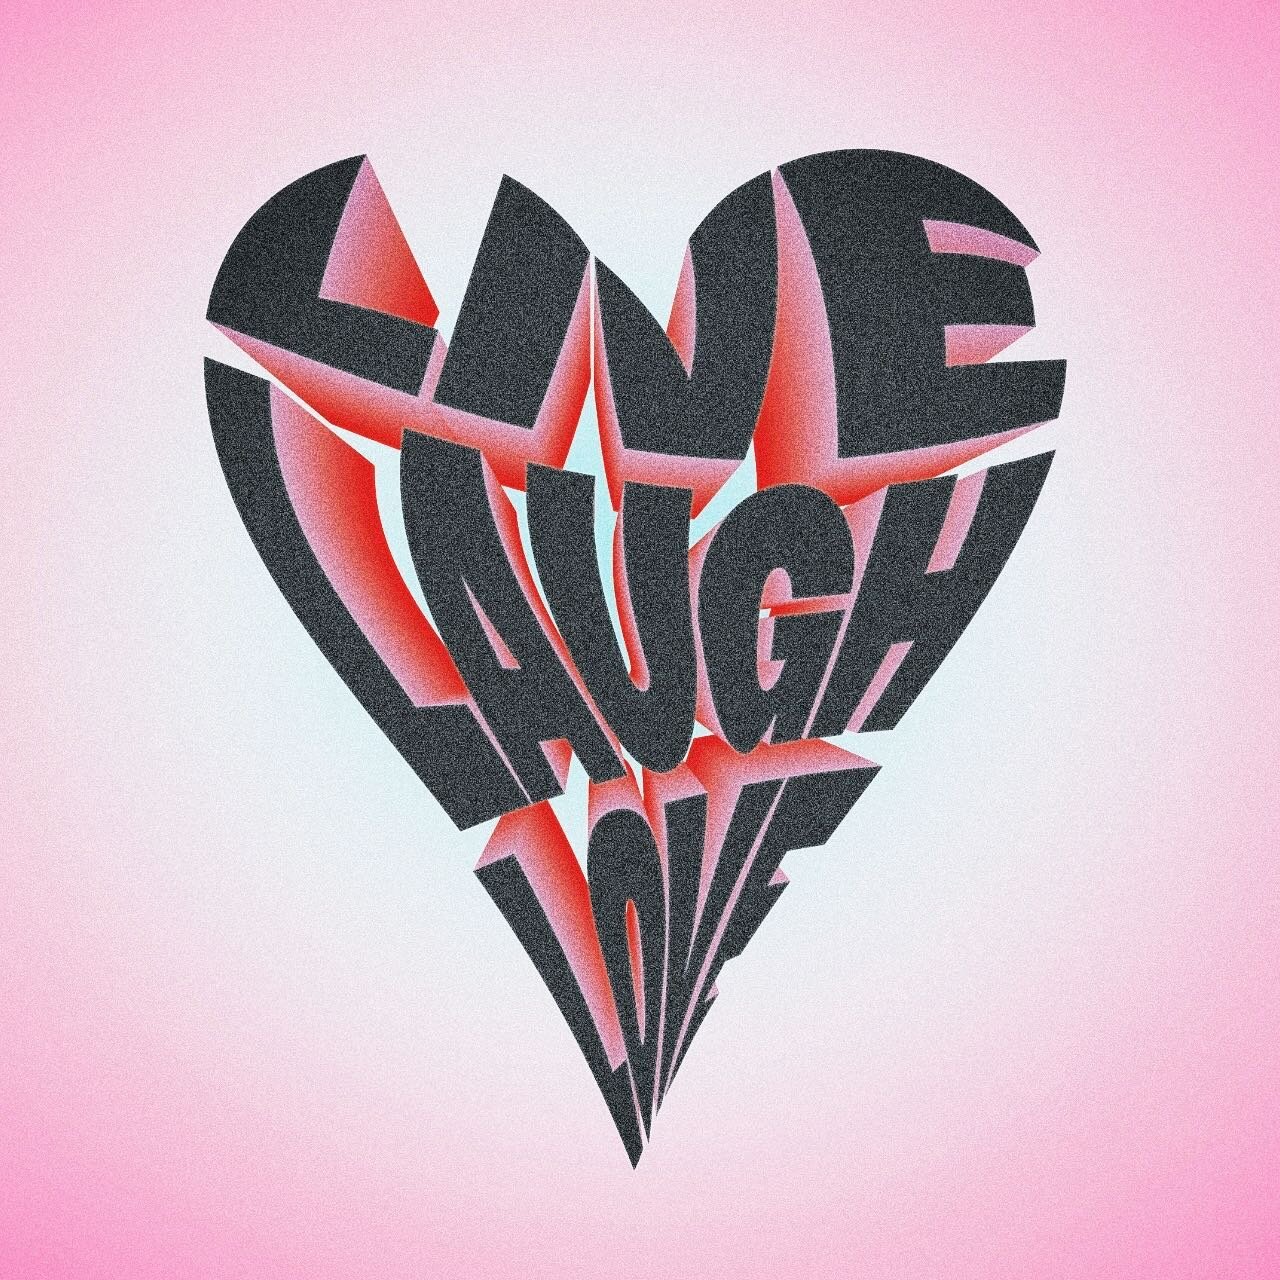 there&rsquo;s no one I&rsquo;d rather live laugh love with @im_sarah_jean 🖤 #livelaughlove #valentine #funkytype #heartart #ilysfm